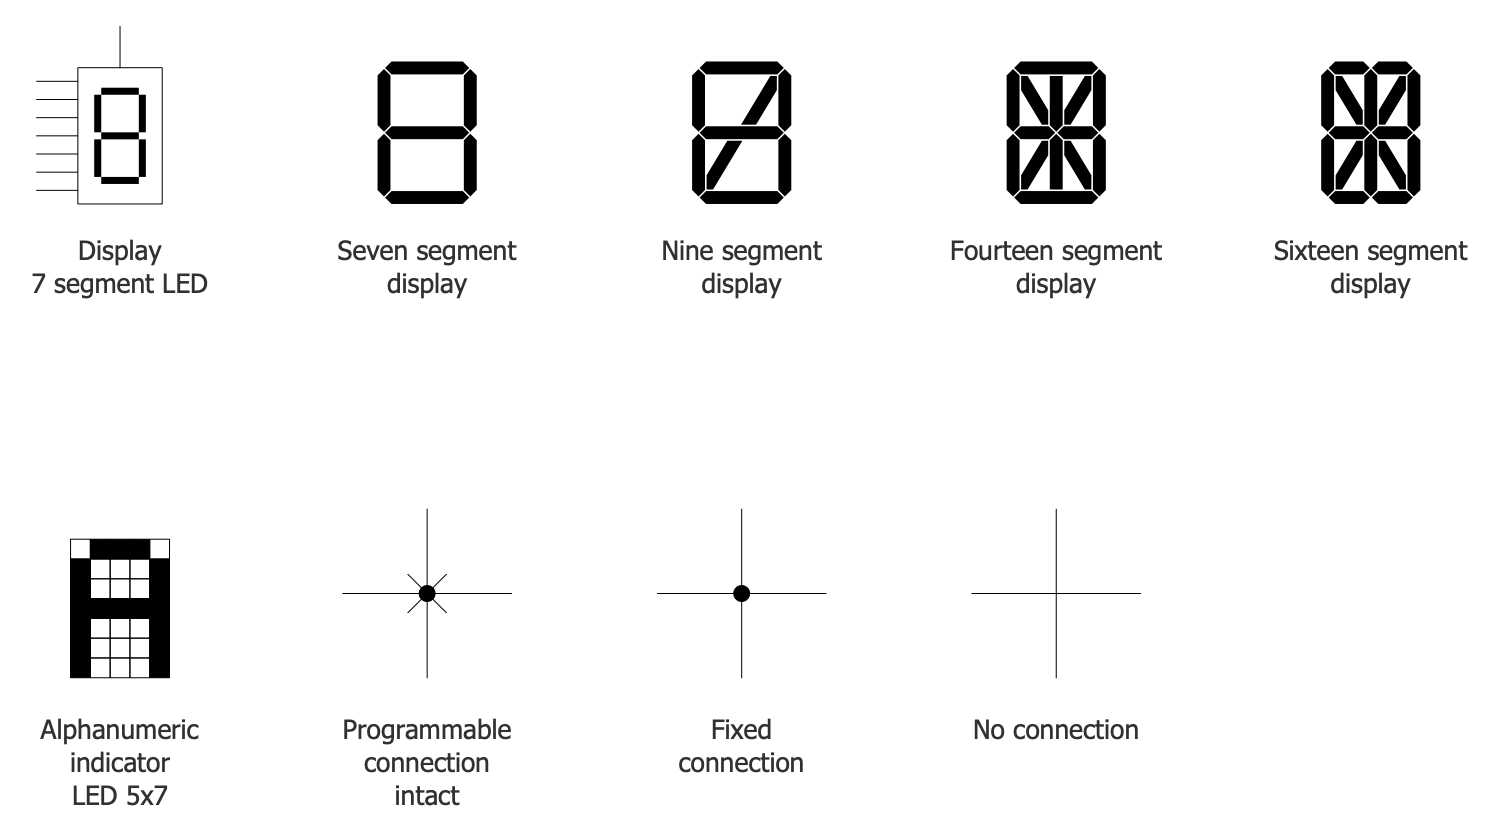 Design Elements — Displays and Programming Connections